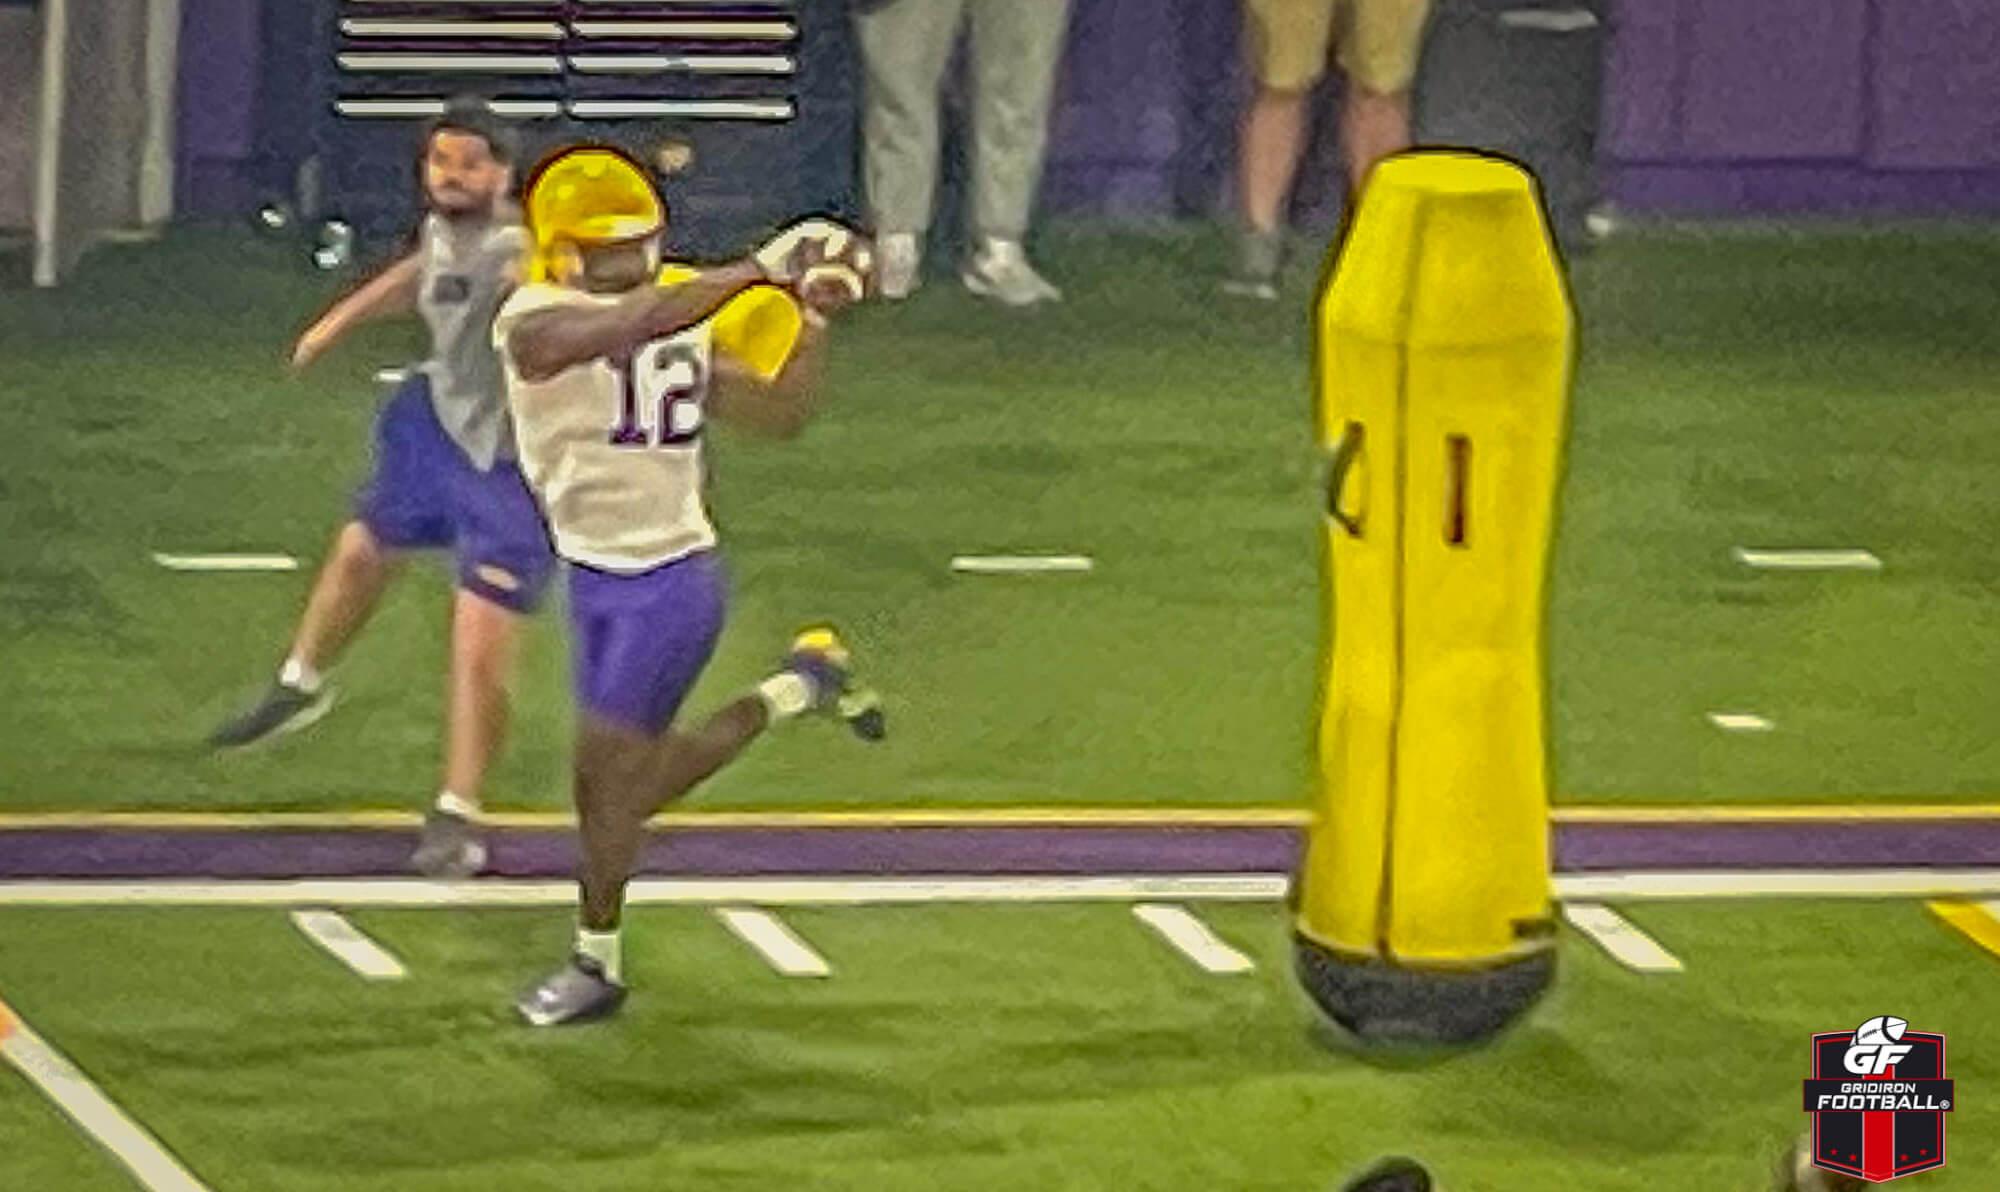 LSU Spring Practice Report #1: Players Take On More Accountability With New Coaching Staff